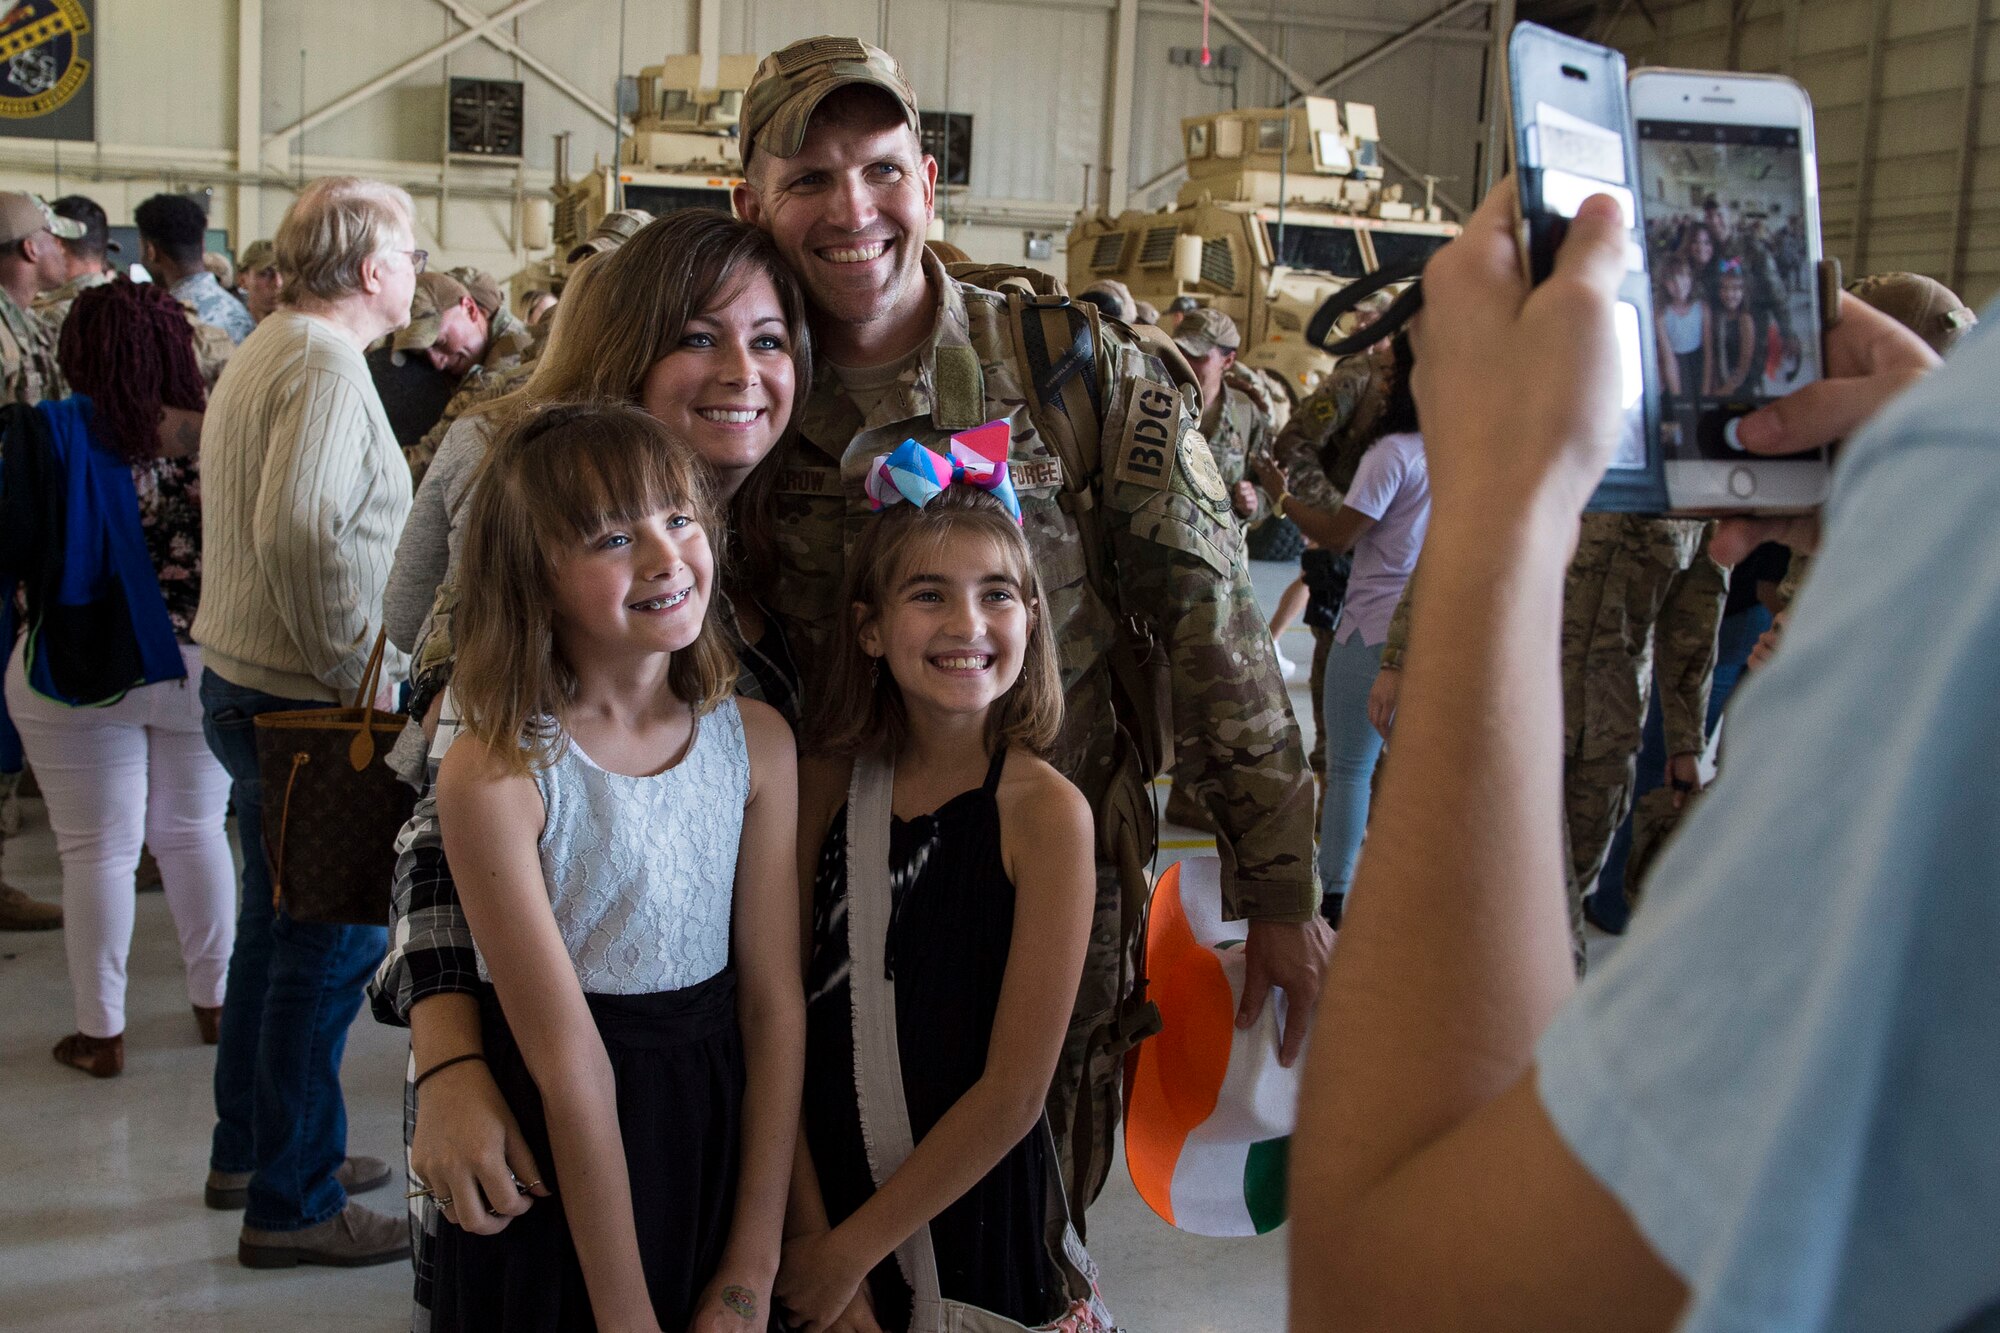 Master Sgt. Robert Renfrow, 823d Base Defense Squadron (BDS), poses for a photo with his family during a redeployment, Oct. 26, 2017, at Moody Air Force Base, Ga. The 822d, 823d and 824th BDS’s provide high-risk force protection and integrated base defense for expeditionary air forces. Airmen from the 823d BDS just returned home from conducting relief-in-place in the United States Africa Command theater while Airmen from the 824th BDS took their place. (U.S. Air Force photo by Senior Airman Janiqua P. Robinson)